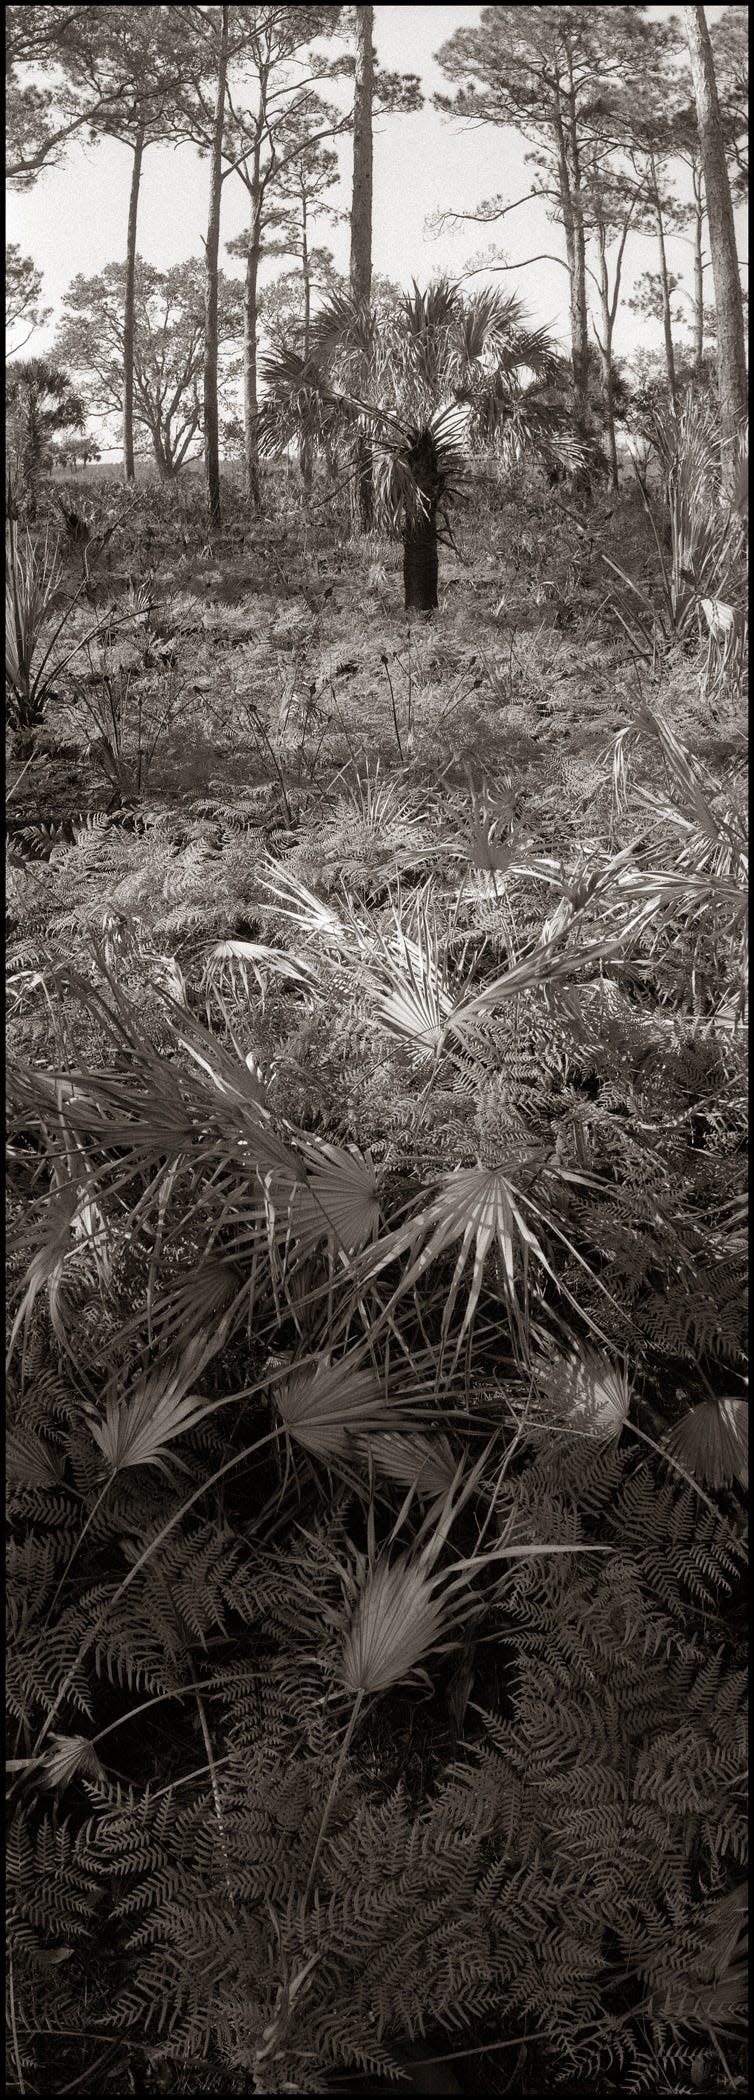 Todd Bertolaet's Hickory Mound shot captures everything from ferns to pine trees.